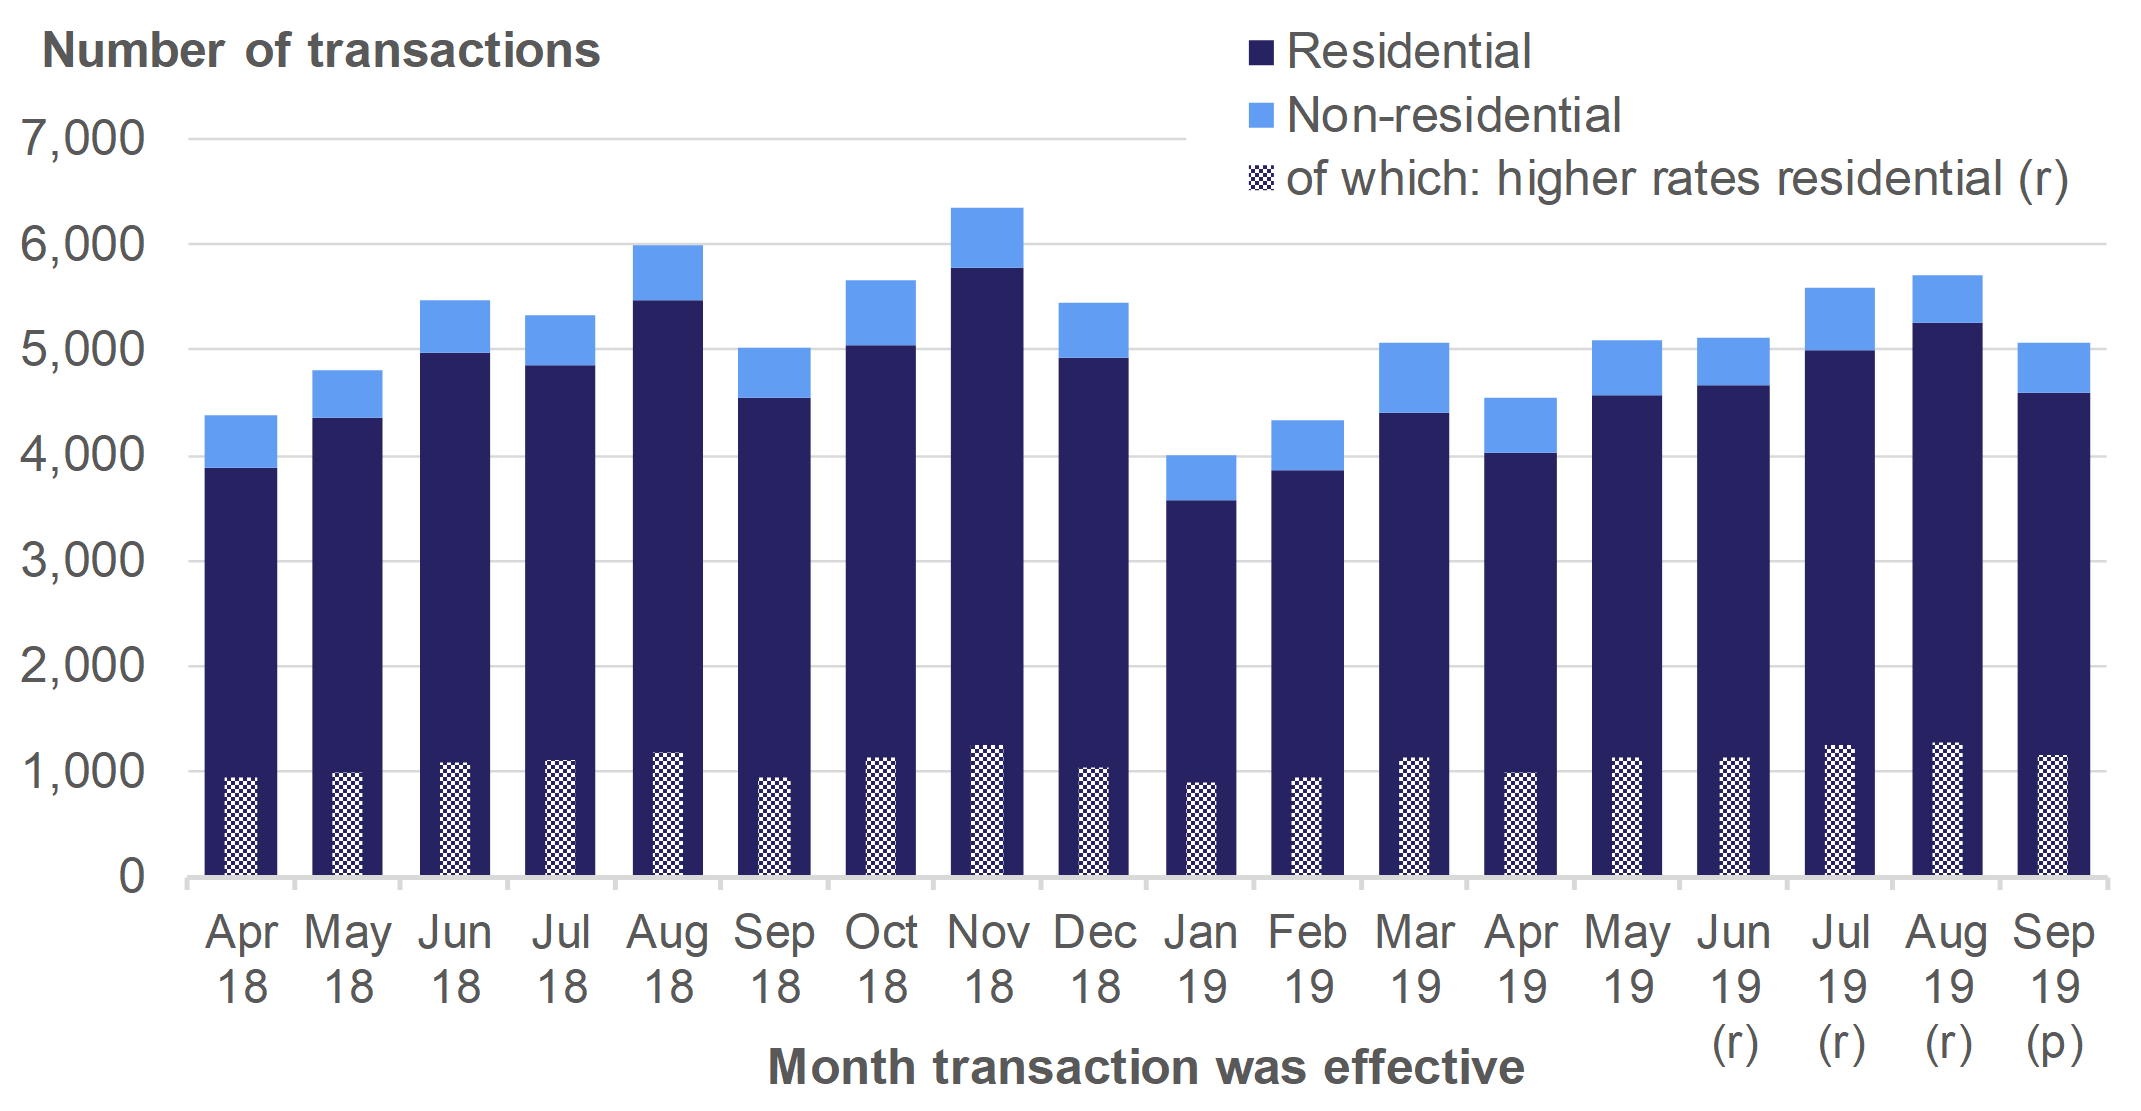 Figure 2.4 shows the monthly numbers of reported notifiable transactions from April 2018 to September 2019, for residential and non-residential transactions.